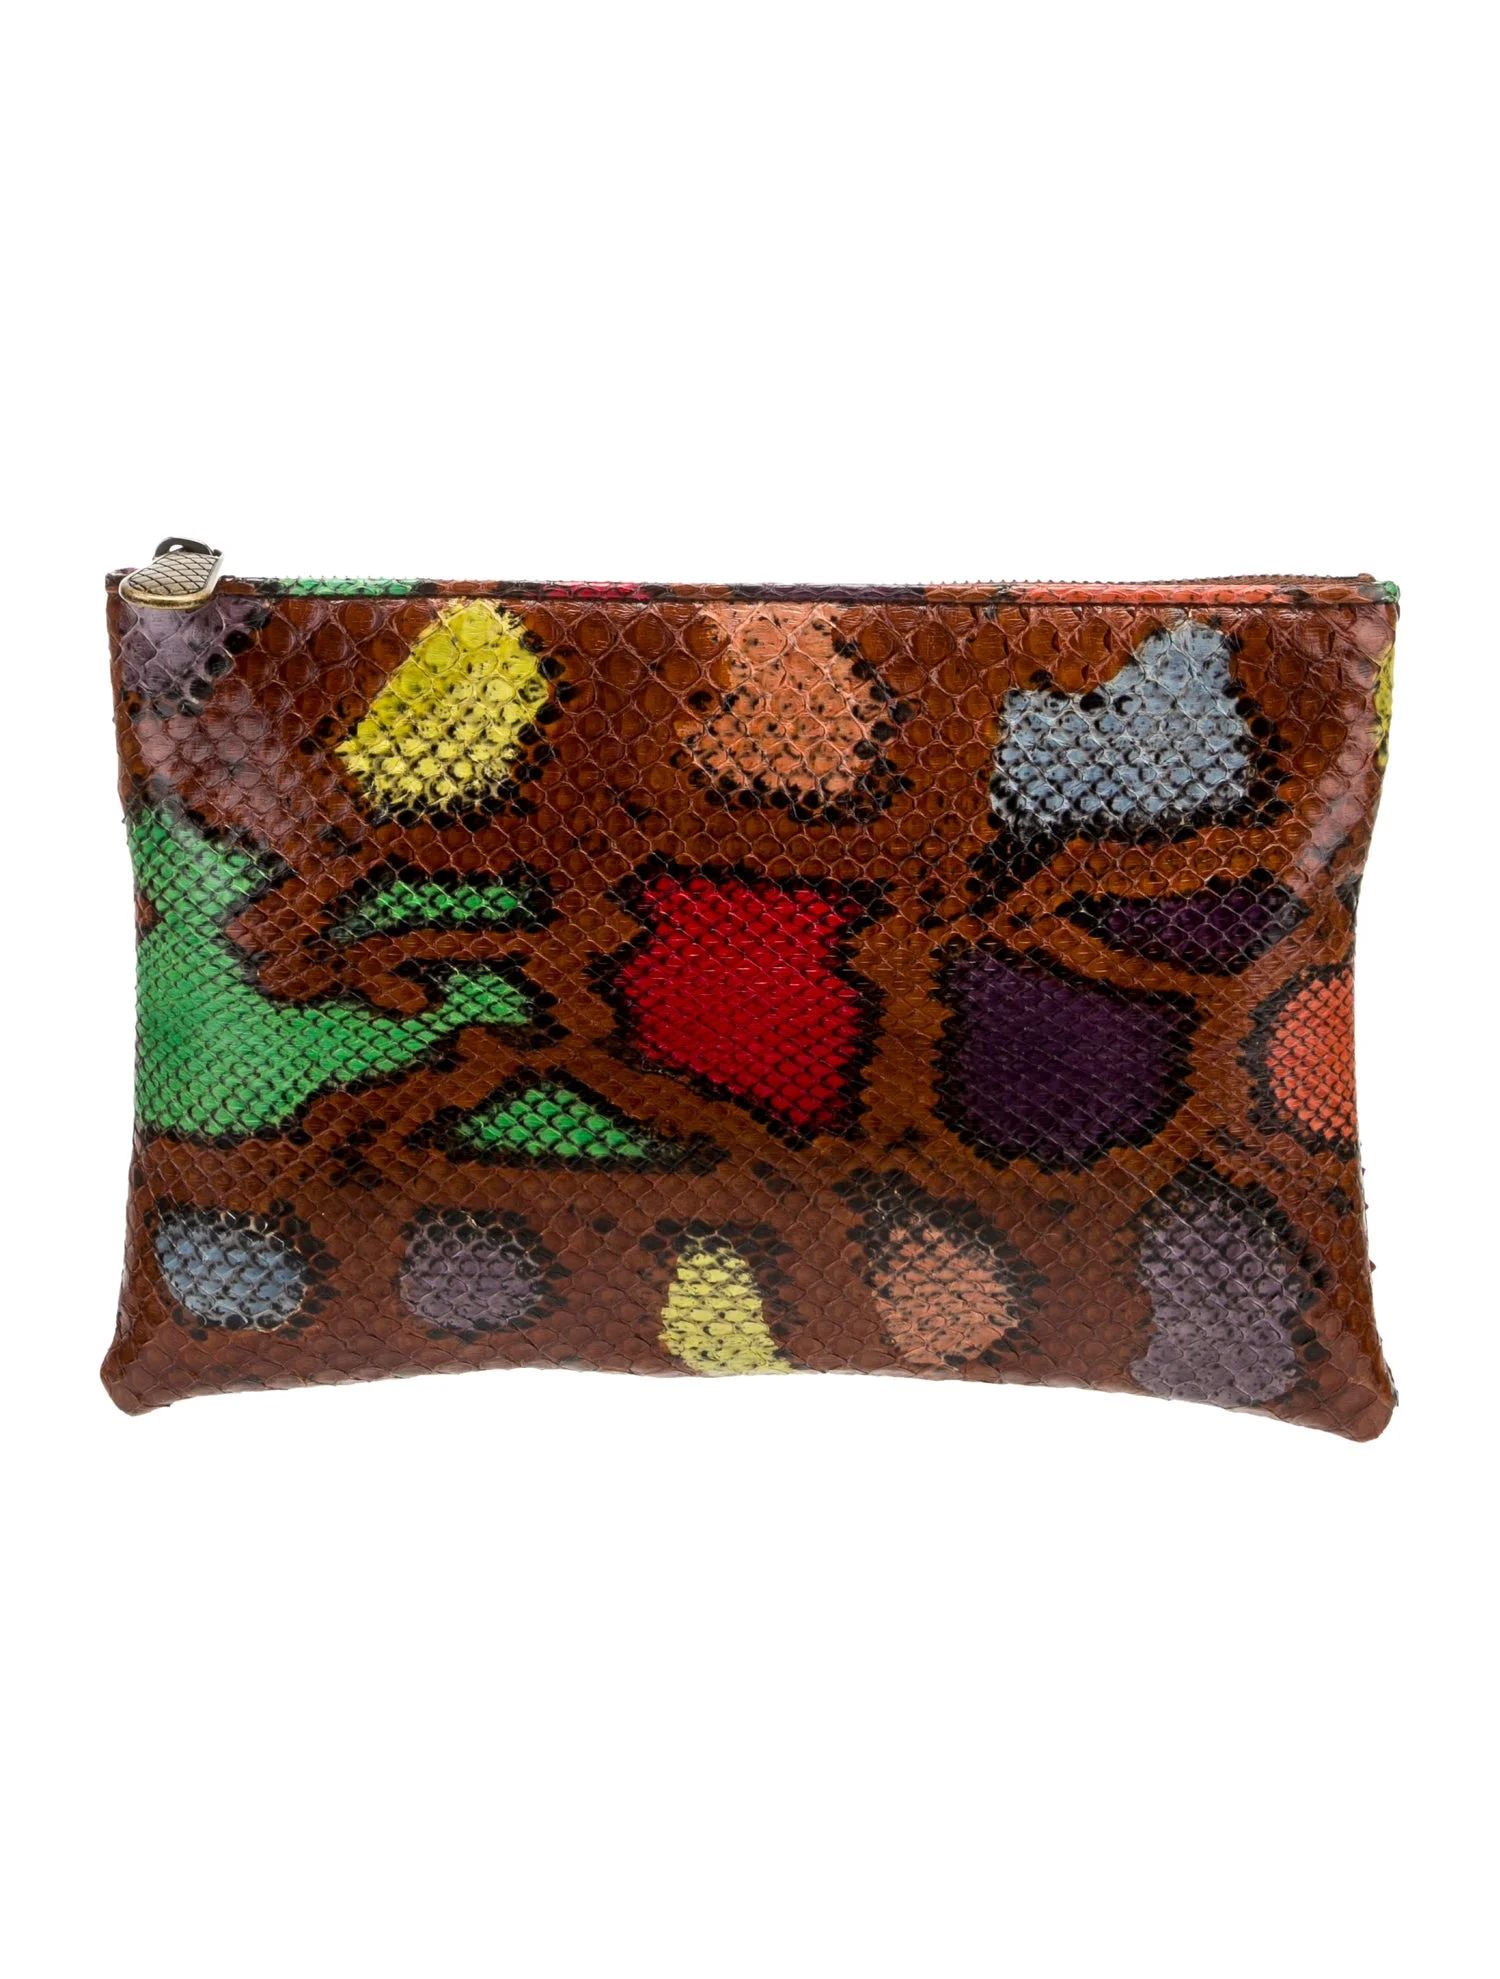 Snakeskin Pouch | The RealReal